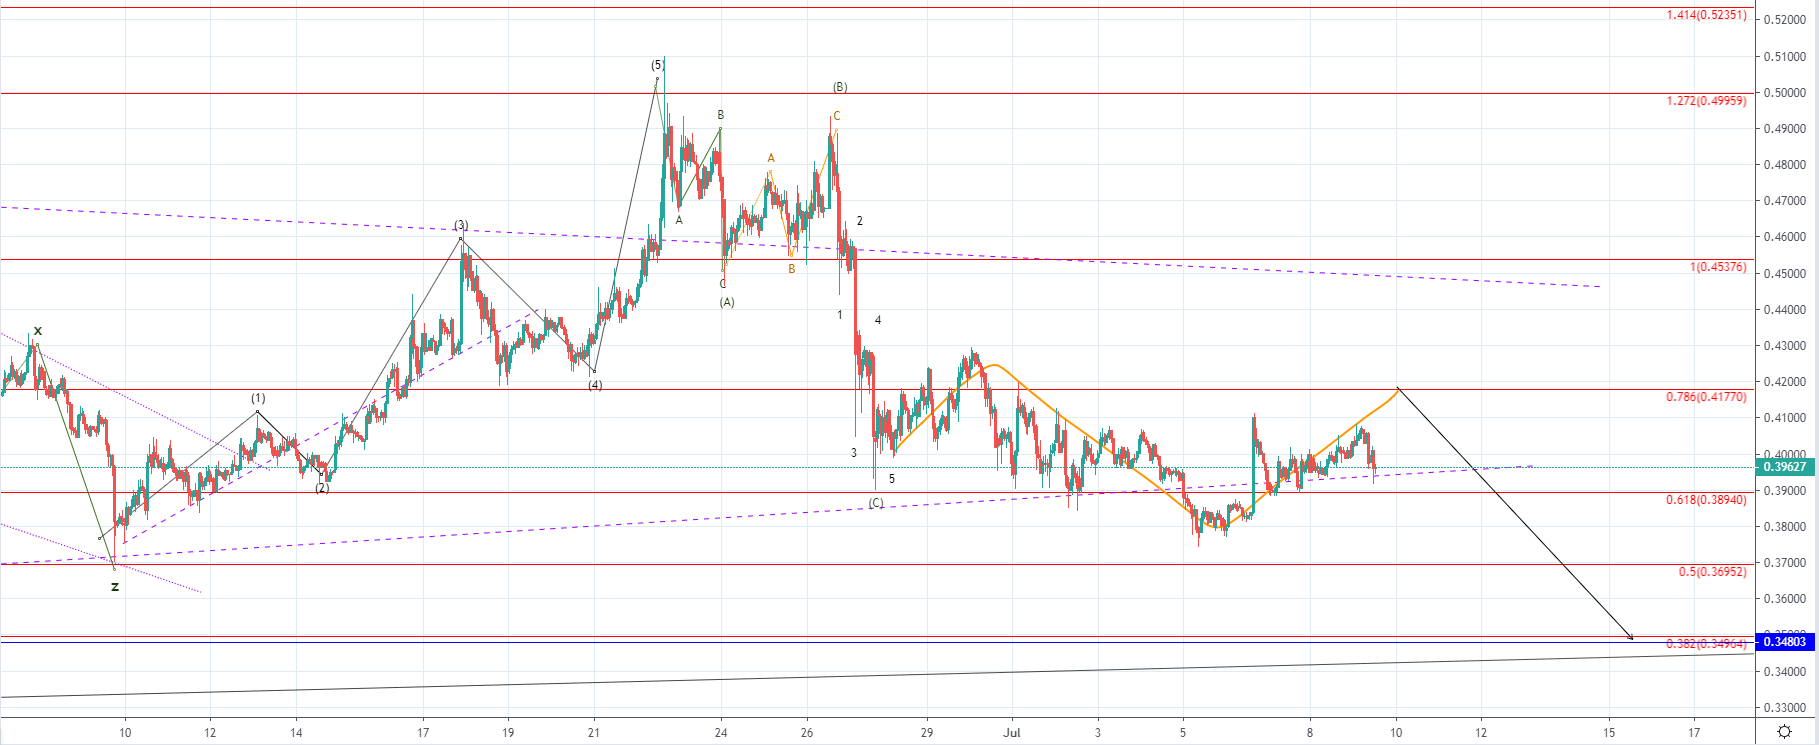 BTC and XRP - The prices recover but for how long?